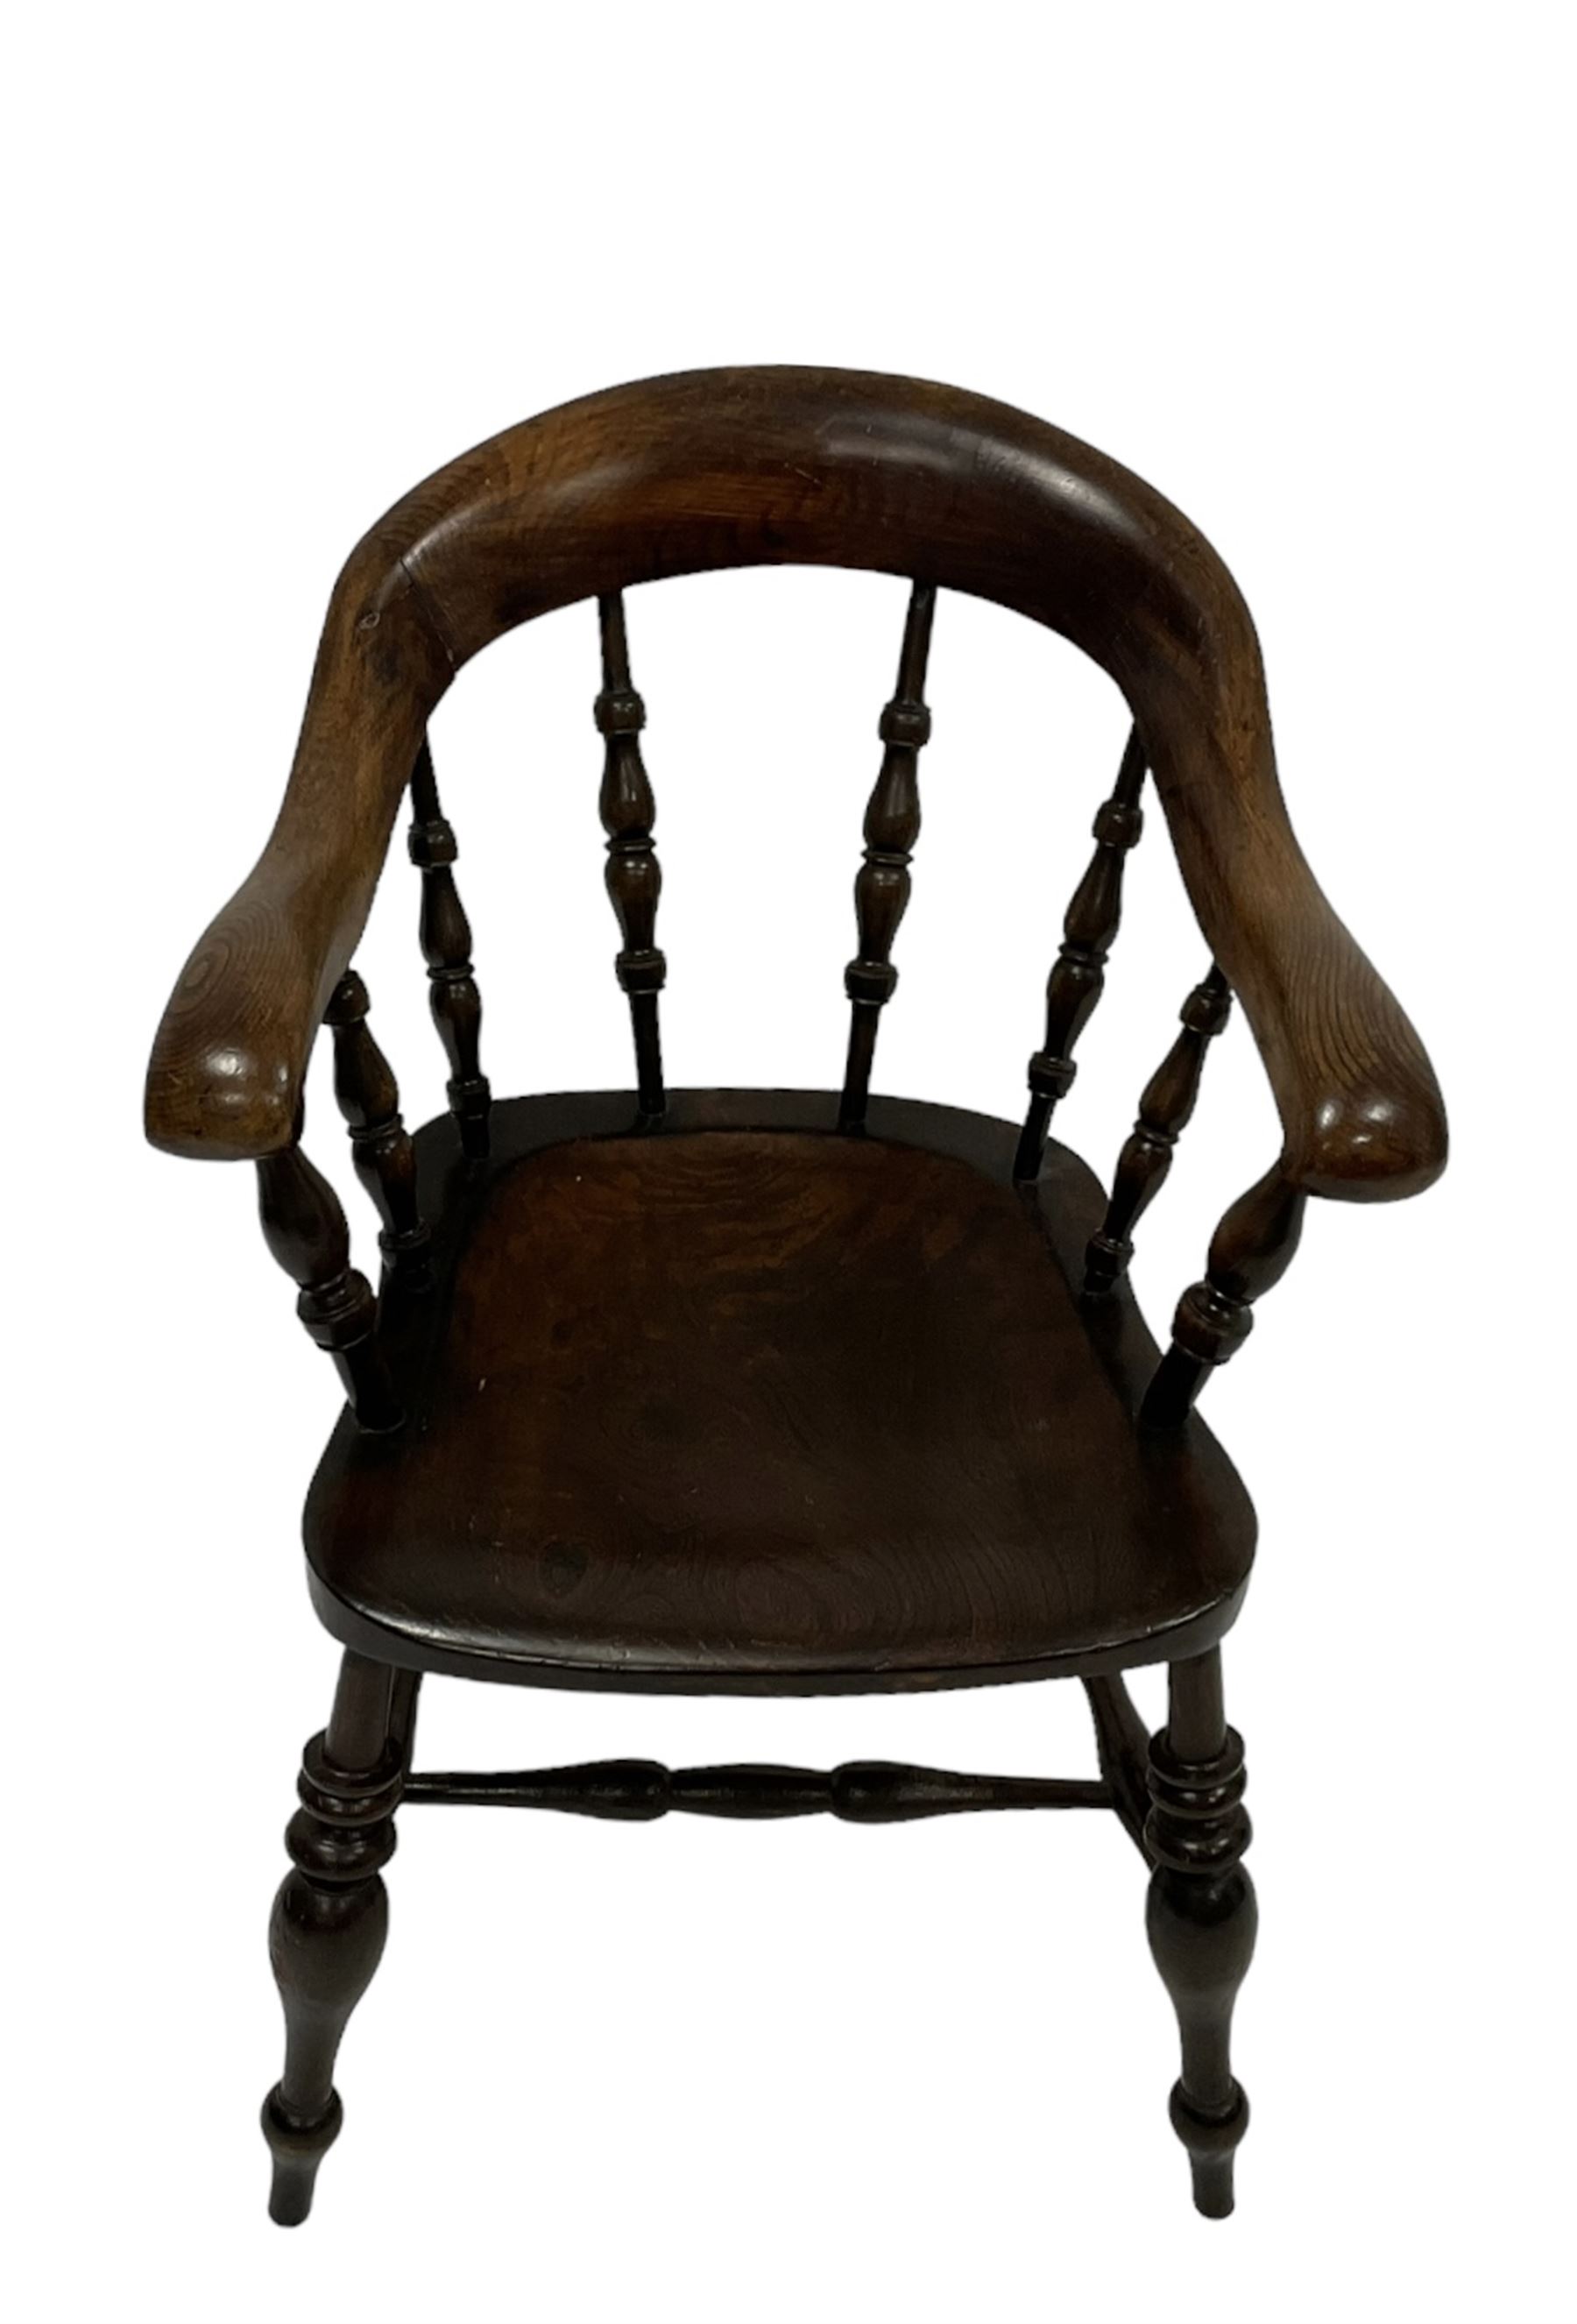 19th century elm and ash captains smokers bow chair - Image 2 of 4